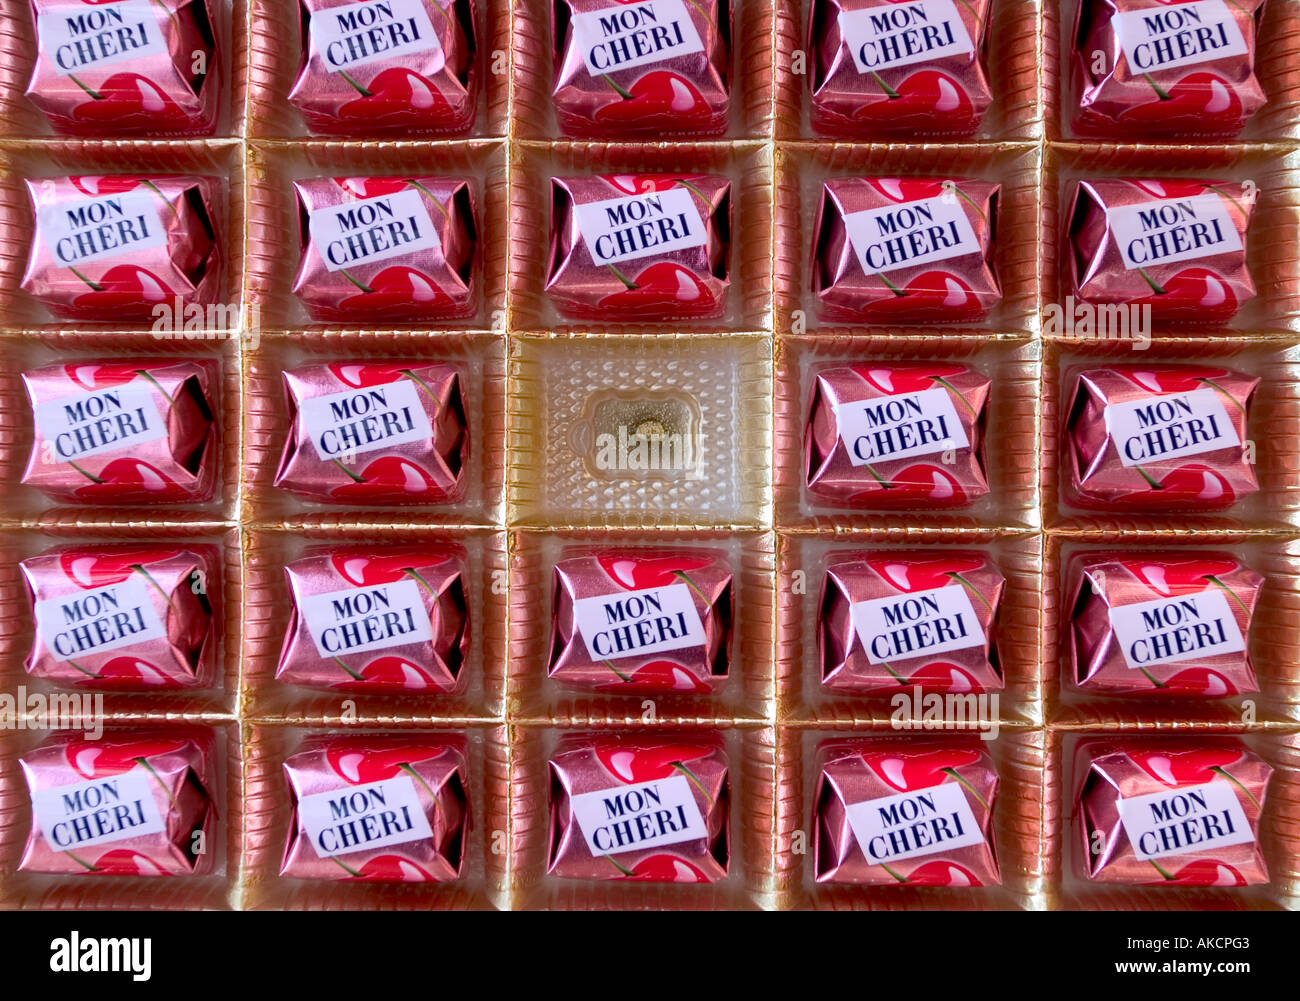 Mon Cheri chocolate box with one bonbons remained Stock Photo - Alamy